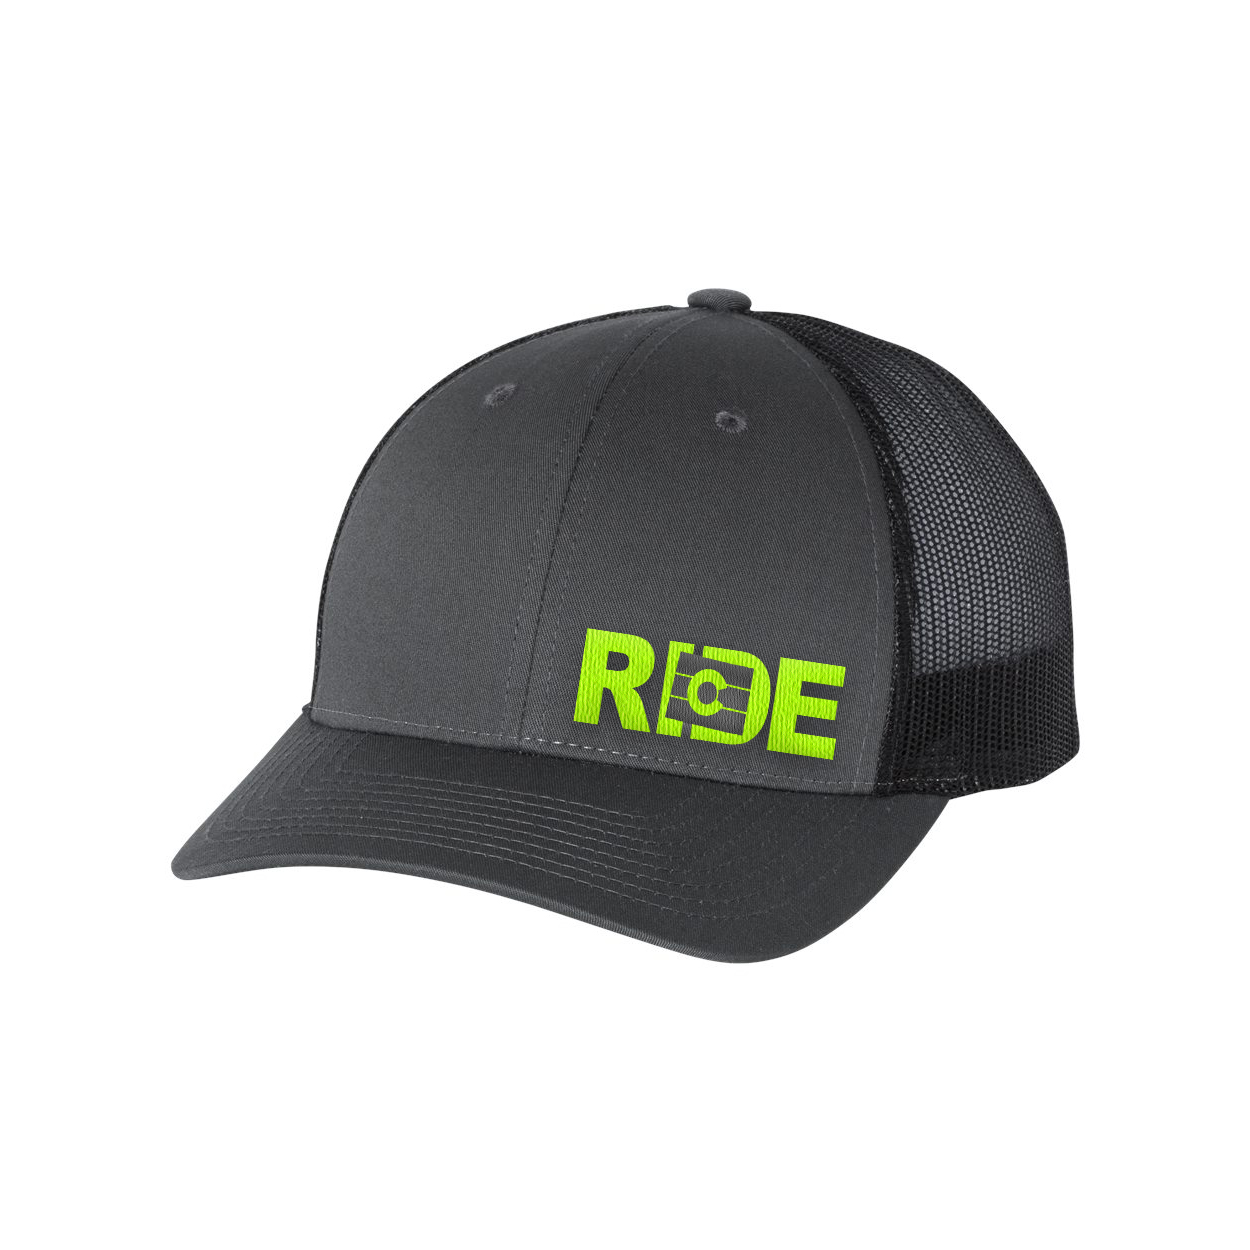 Ride Colorado Night Out Embroidered Snapback Trucker Hat Gray/Black/Hi-Vis